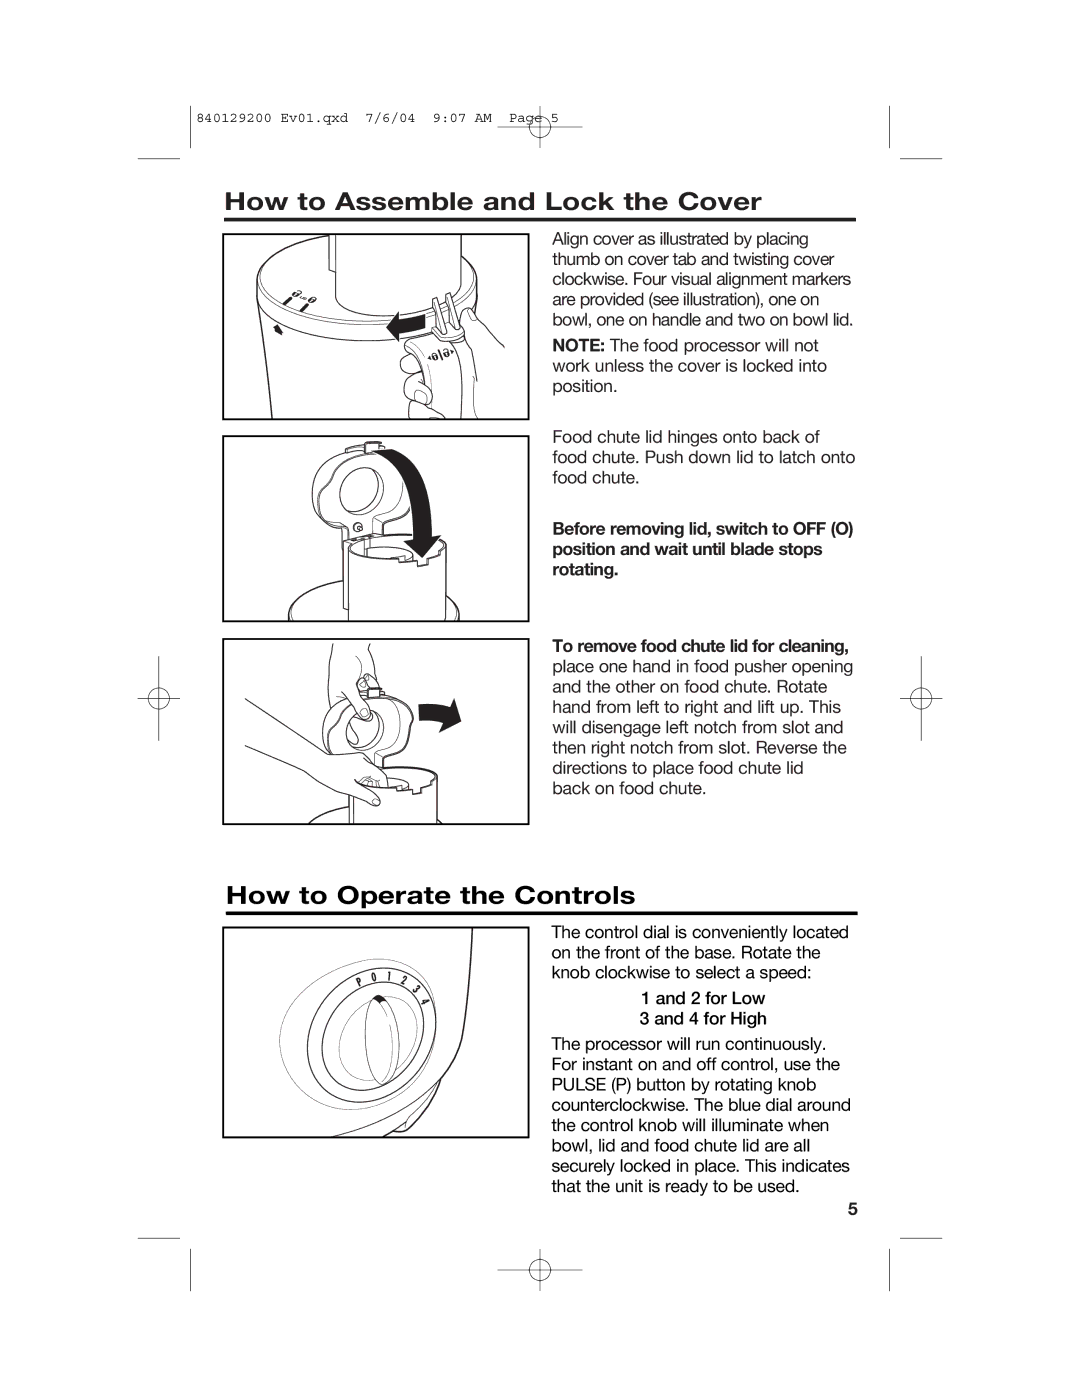 Hamilton Beach 70590C manual How to Assemble and Lock the Cover, How to Operate the Controls 